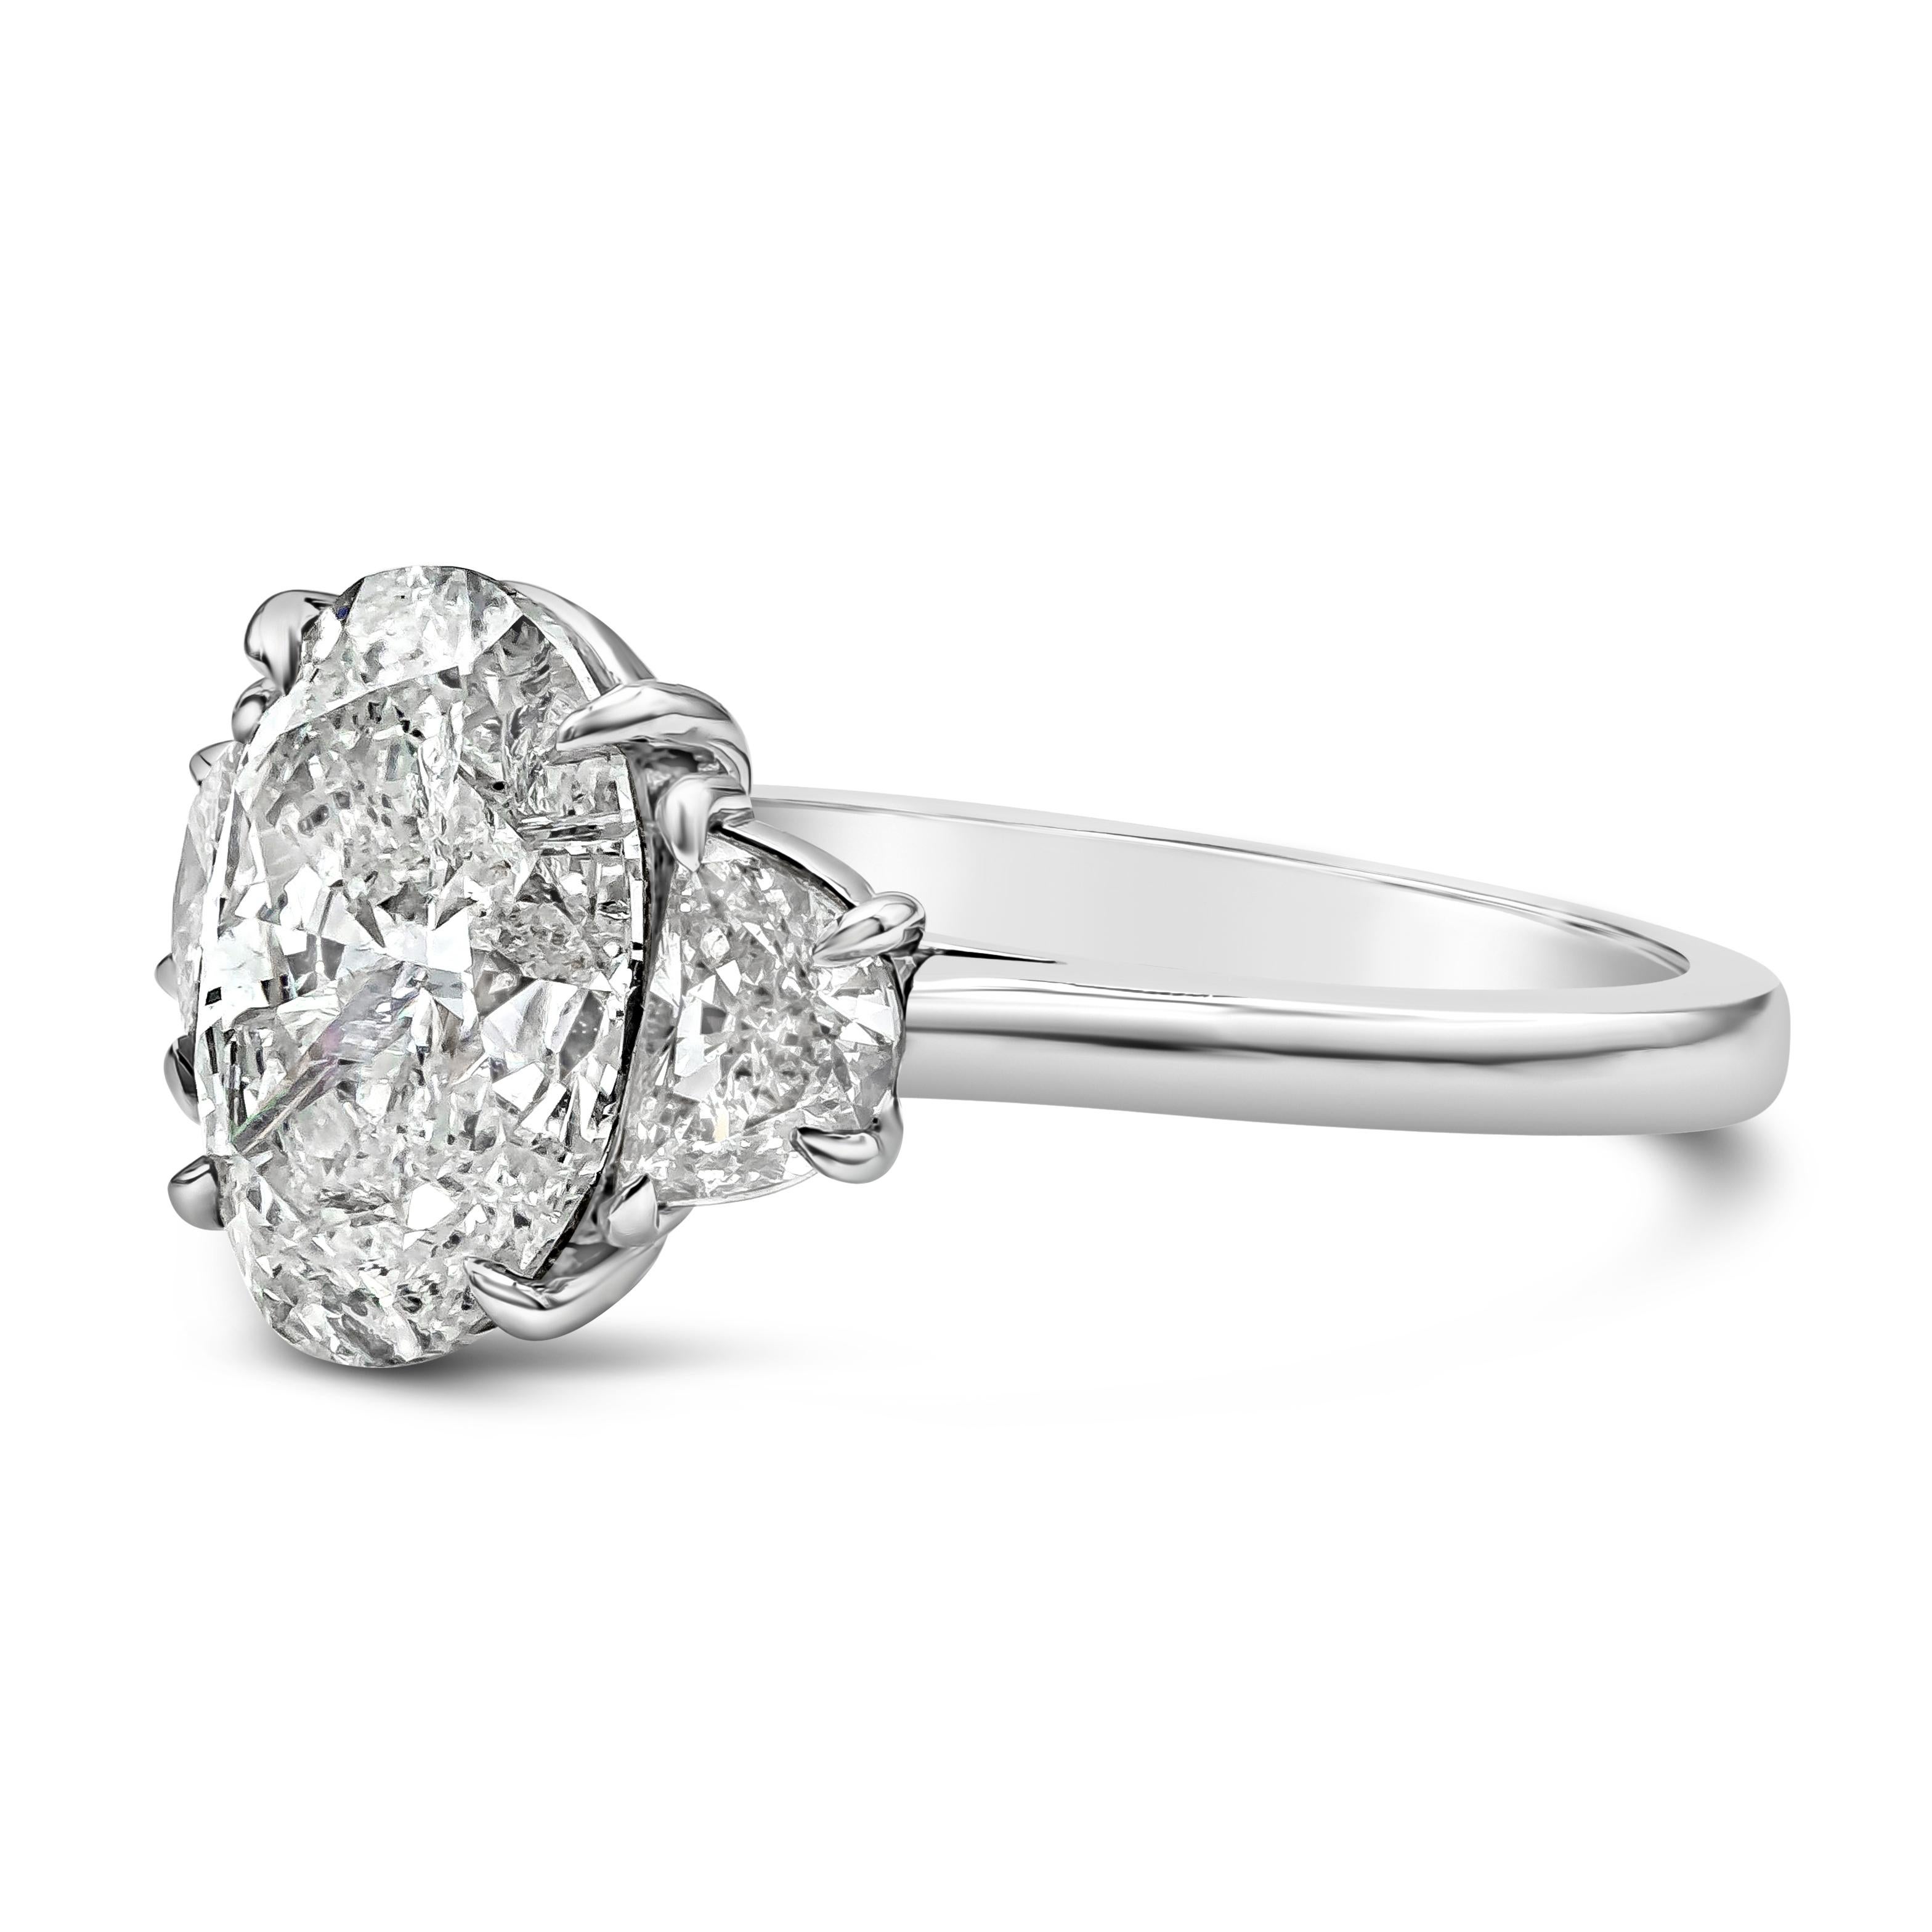 A classic and vibrant three-stone engagement ring showcasing a 3.23 carats oval cut diamond certified by GIA as I Color, I2 in Clarity and set in a classic four prong basket setting. Flanked by two half moon shape diamonds on either side weighing